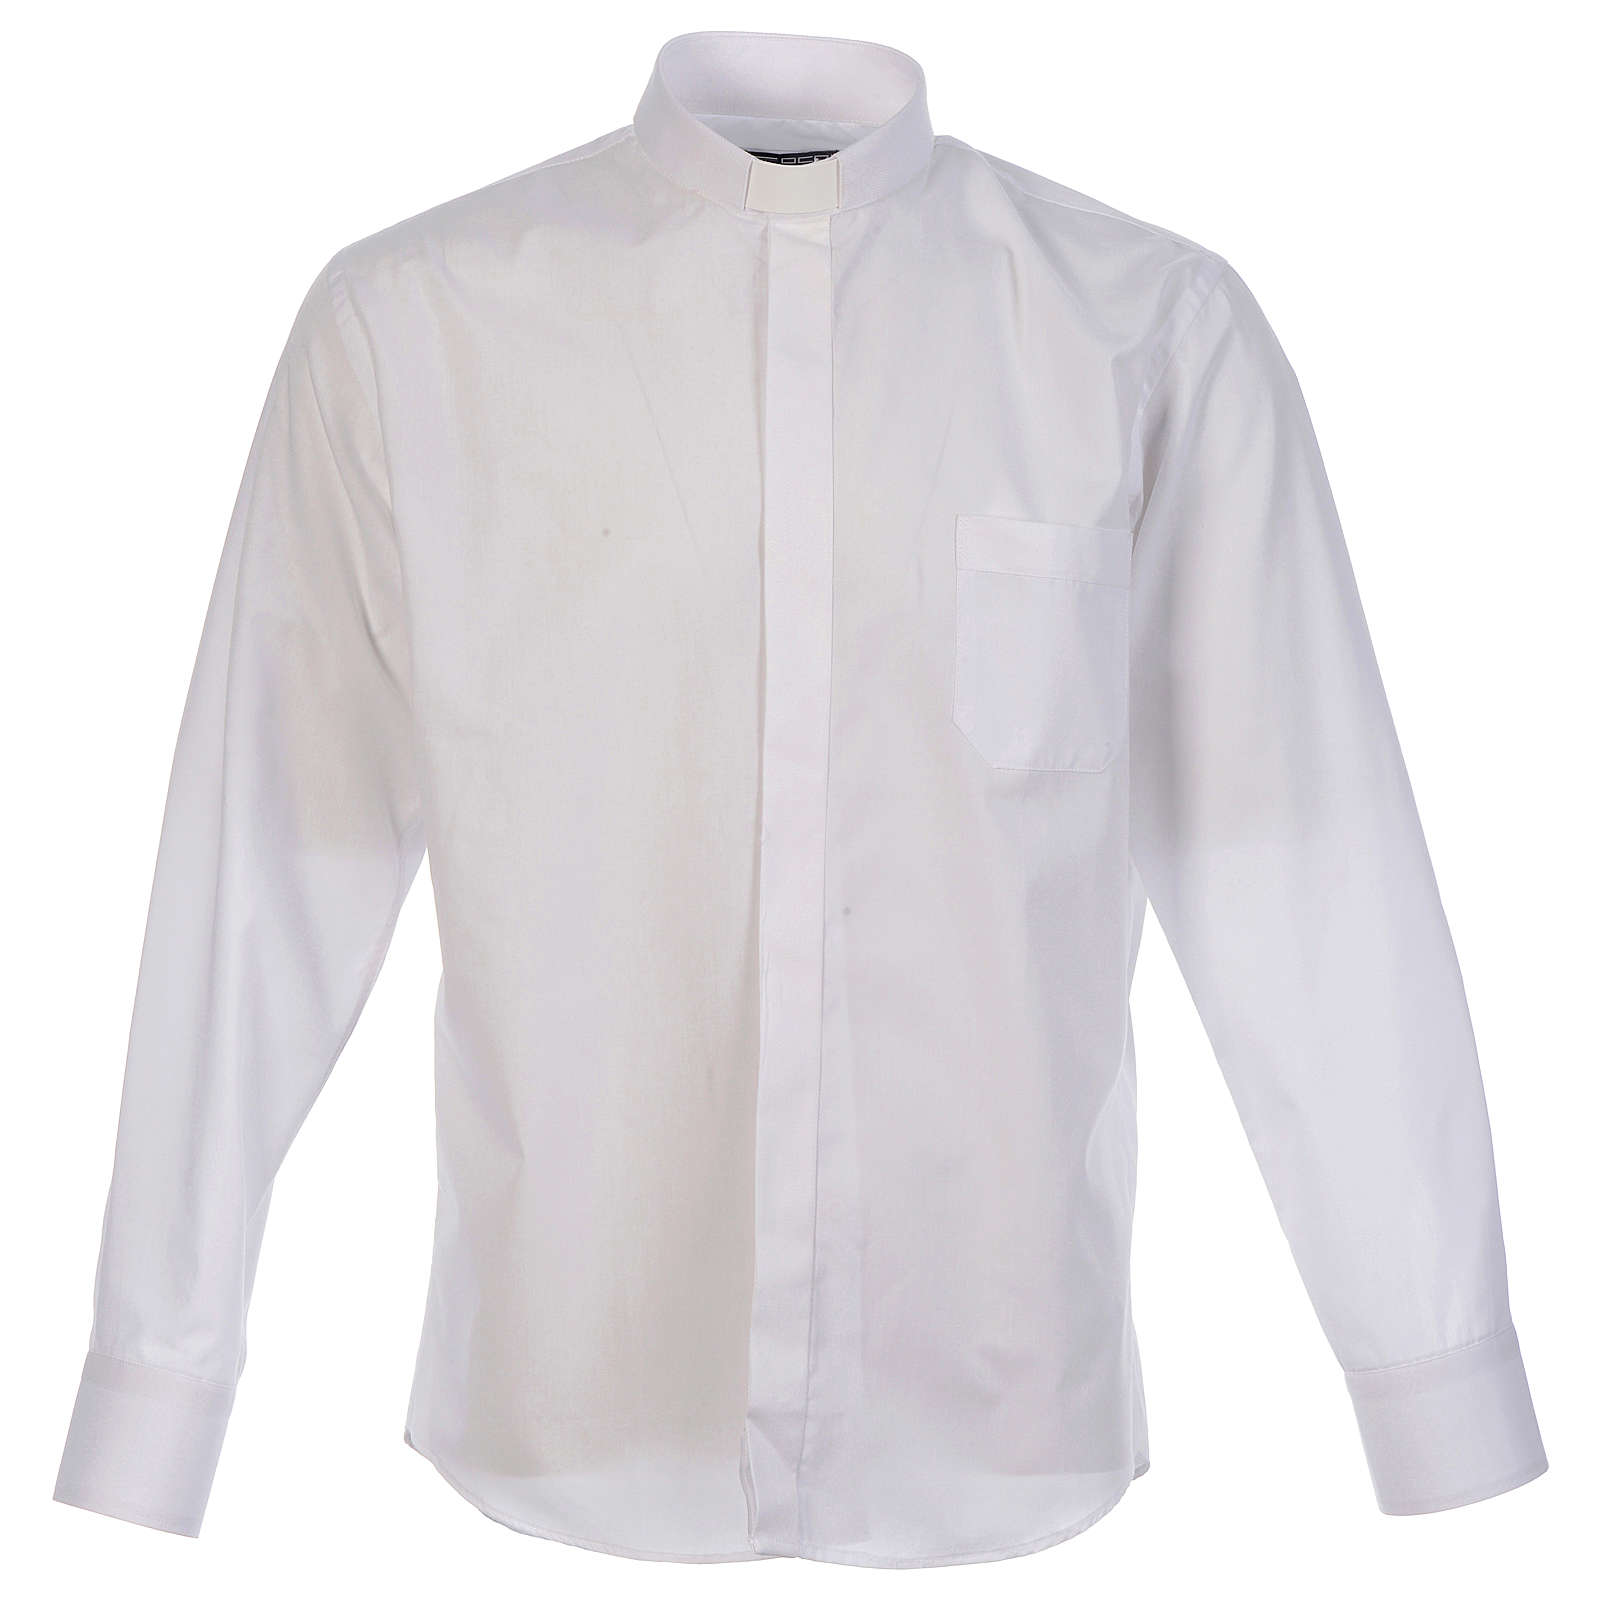 Priest shirt in solid color and diagonal lines white long | online ...